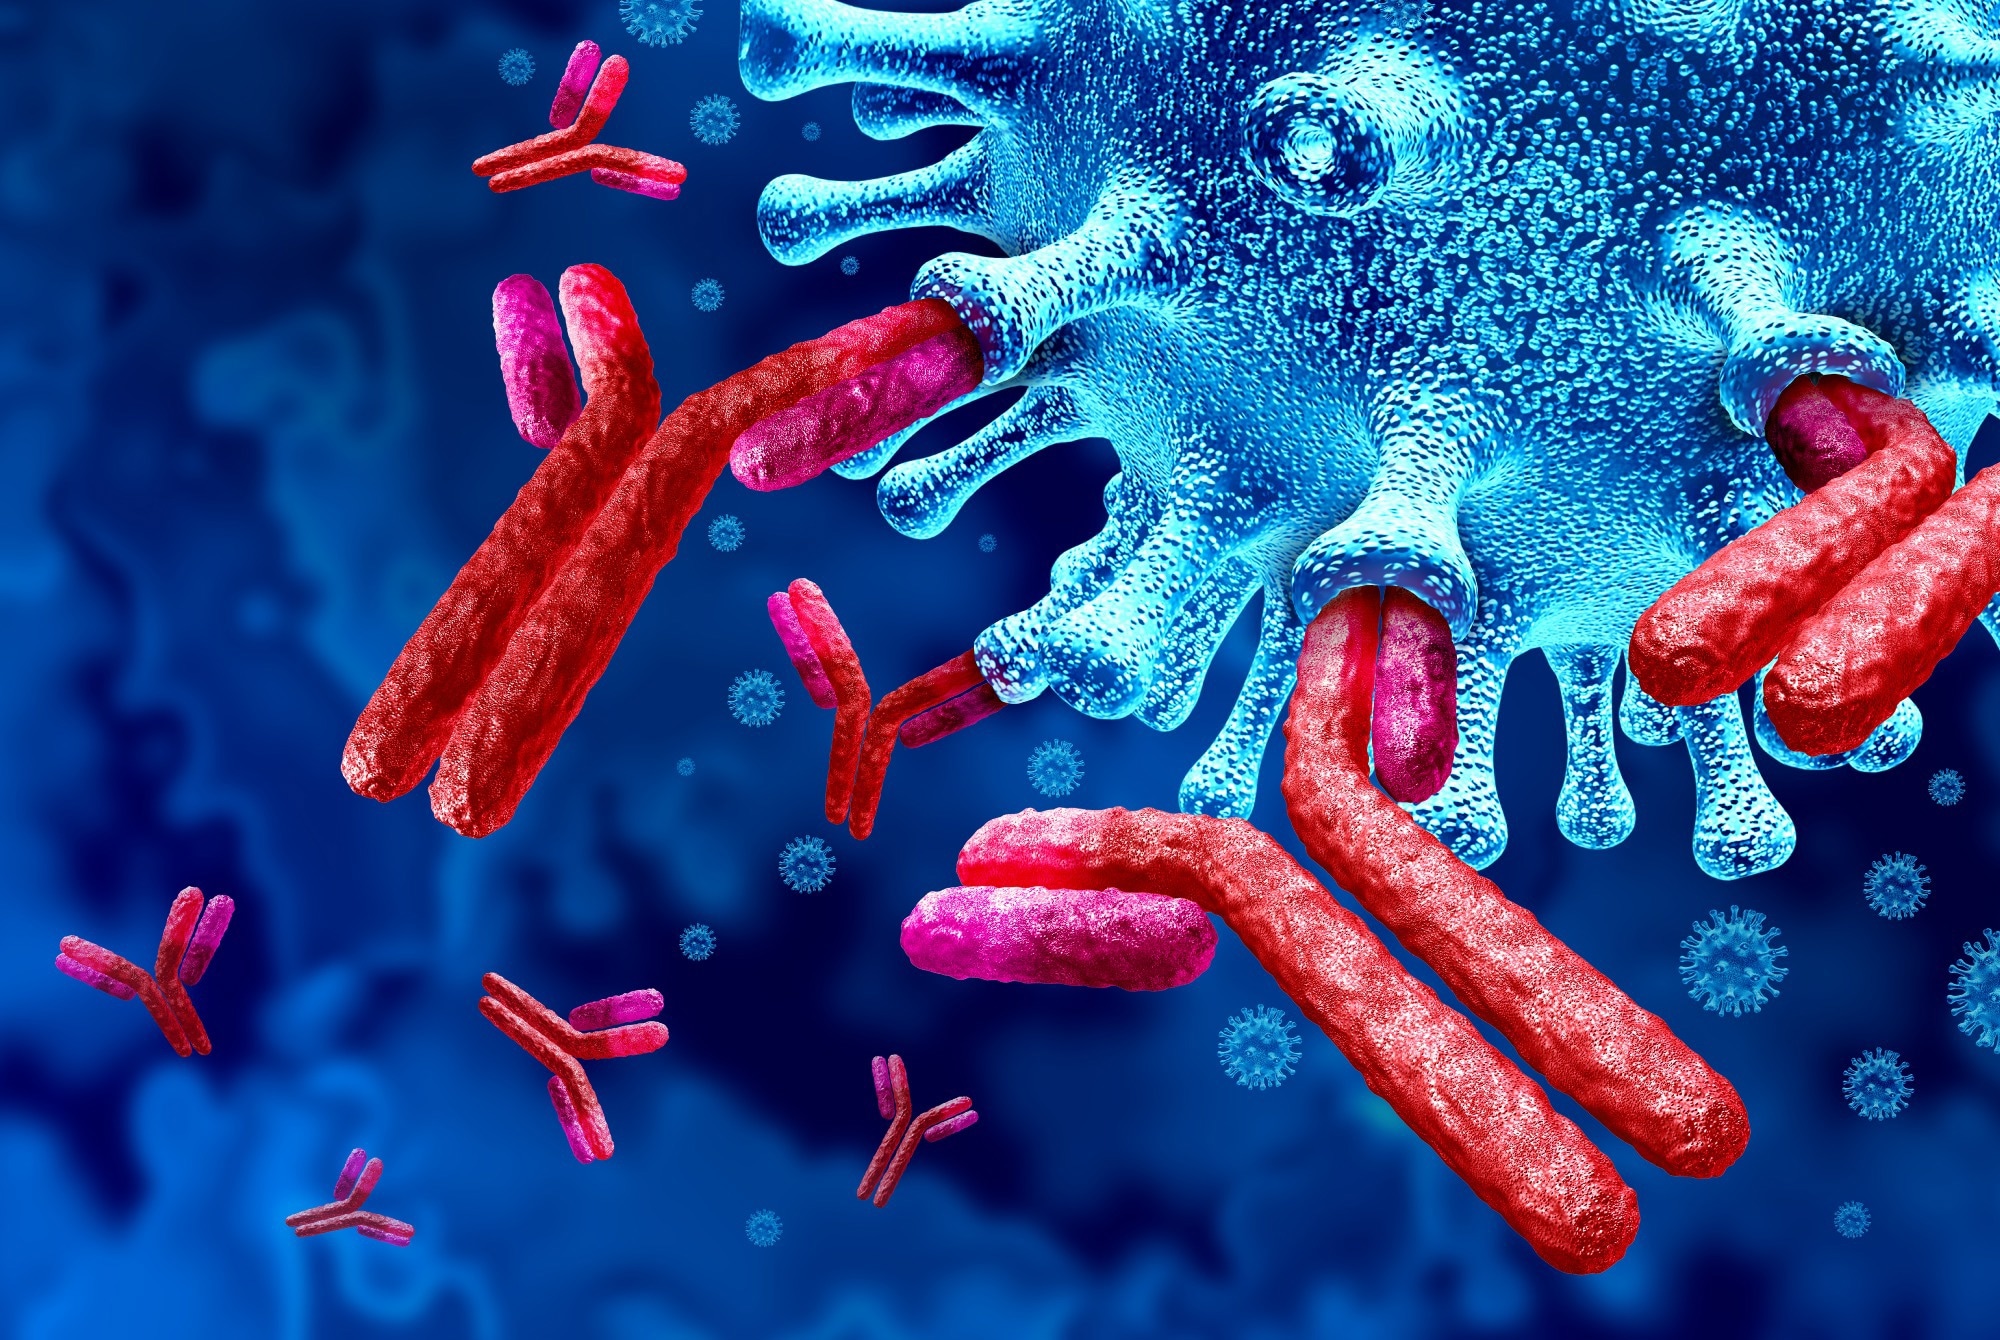 Study: Antibody-mediated protection against symptomatic COVID-19 can be achieved at low serum neutralizing titers. Image Credit: Lightspring / Shutterstock